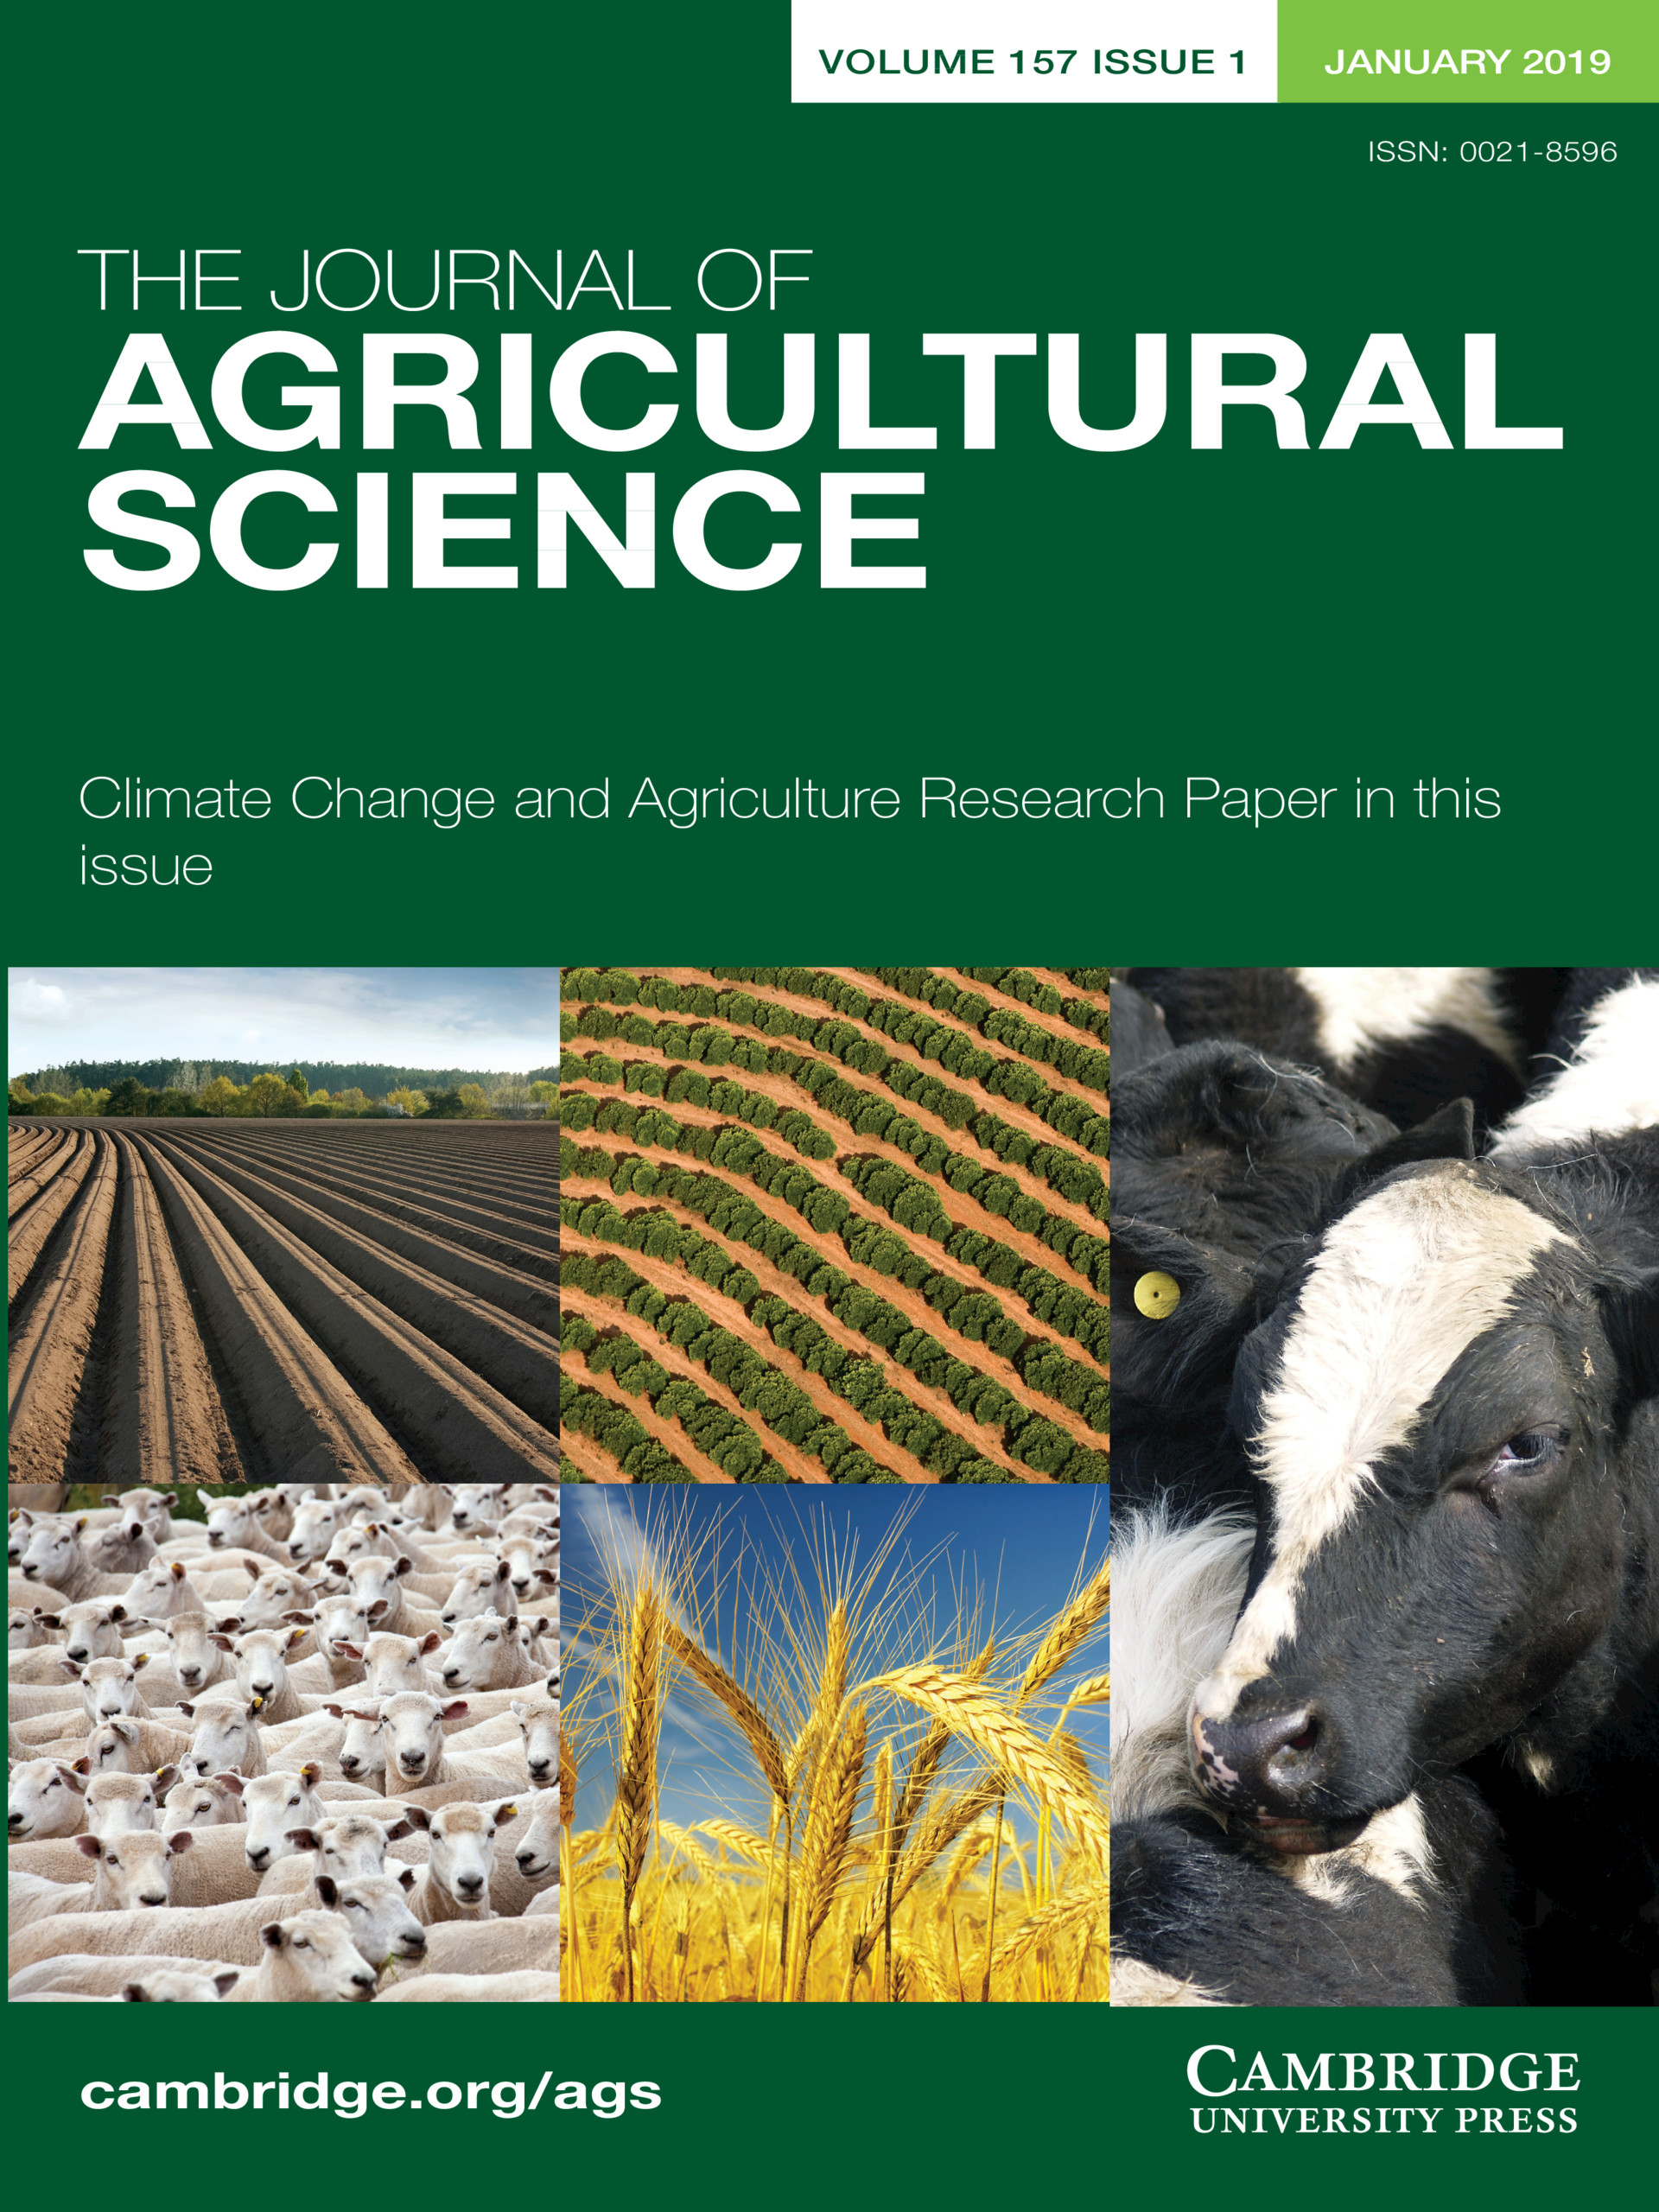 research articles related to agriculture